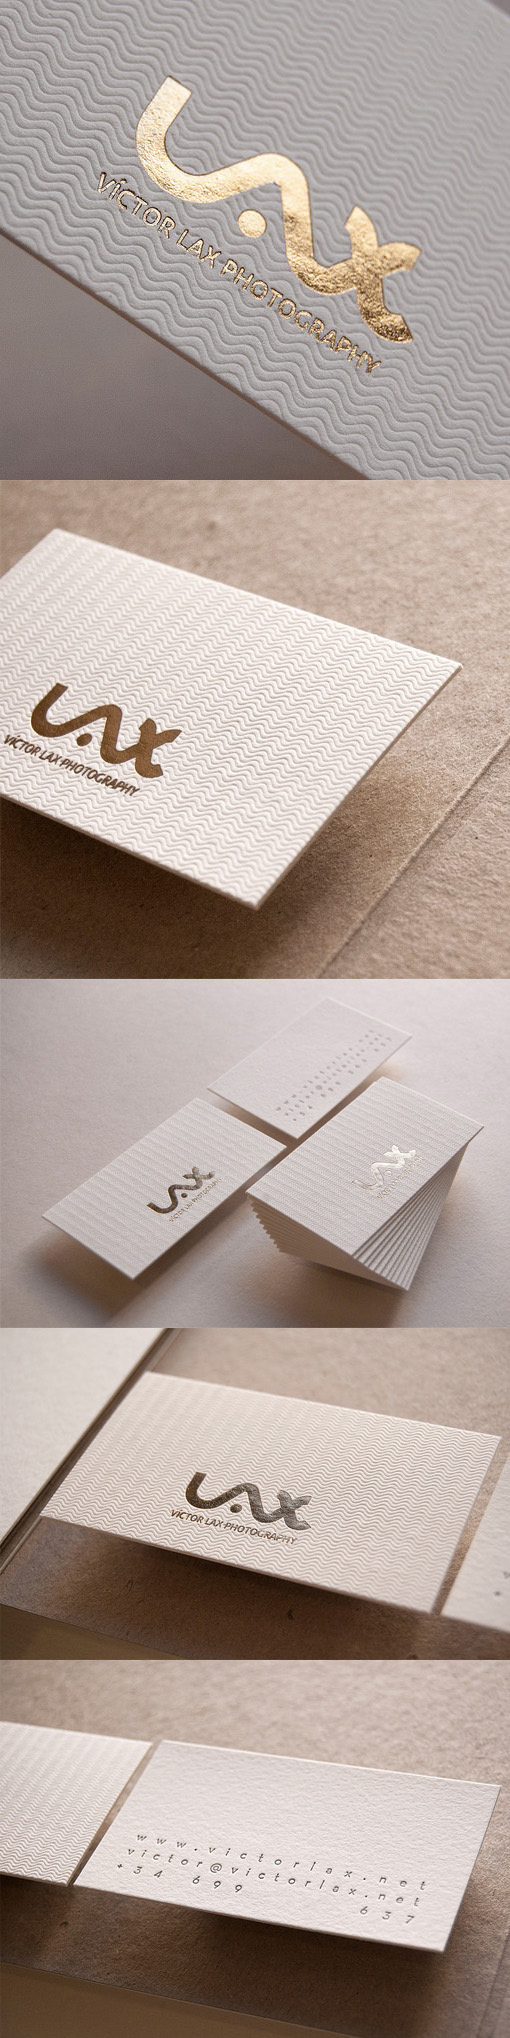 Stylish Subtly Textured White And Gold Foil Business Card For A Photographer